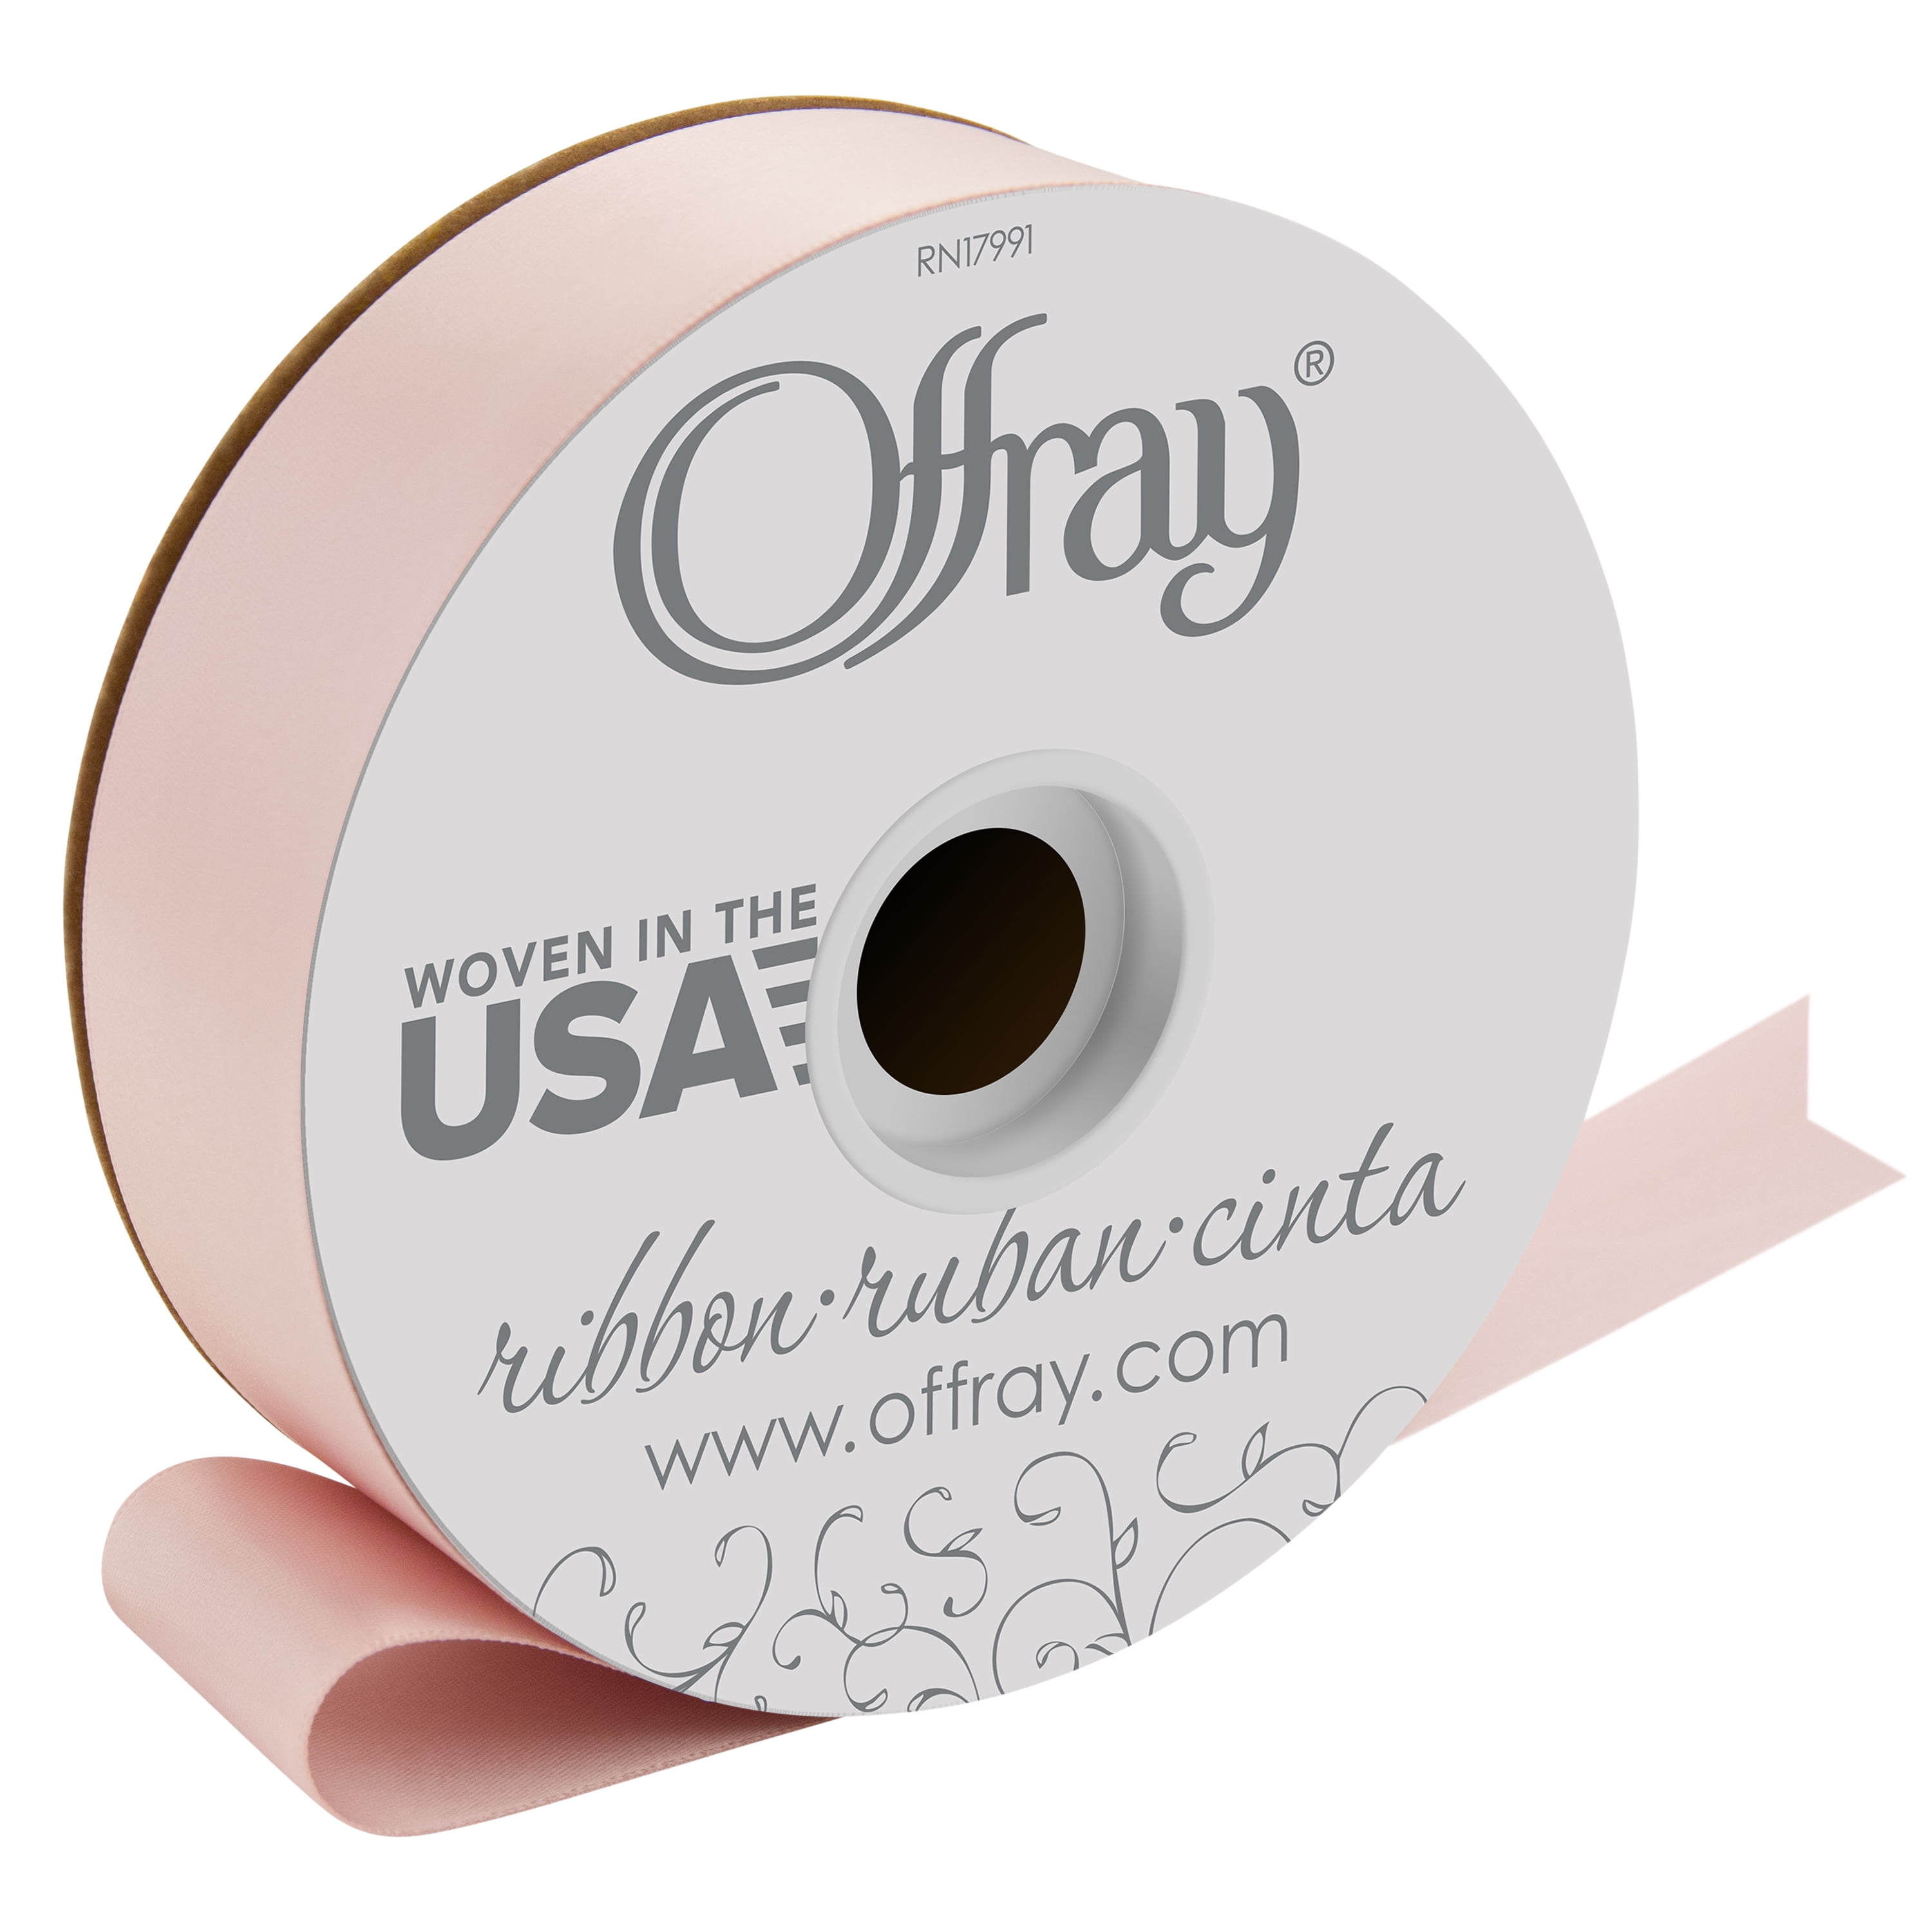 Offray Ribbon, Blush 1 1/2 Inch Double Face Satin Ribbon for Crafting,  Sewing, Gift Wrapping, Decorating, 50yd, 1 Each